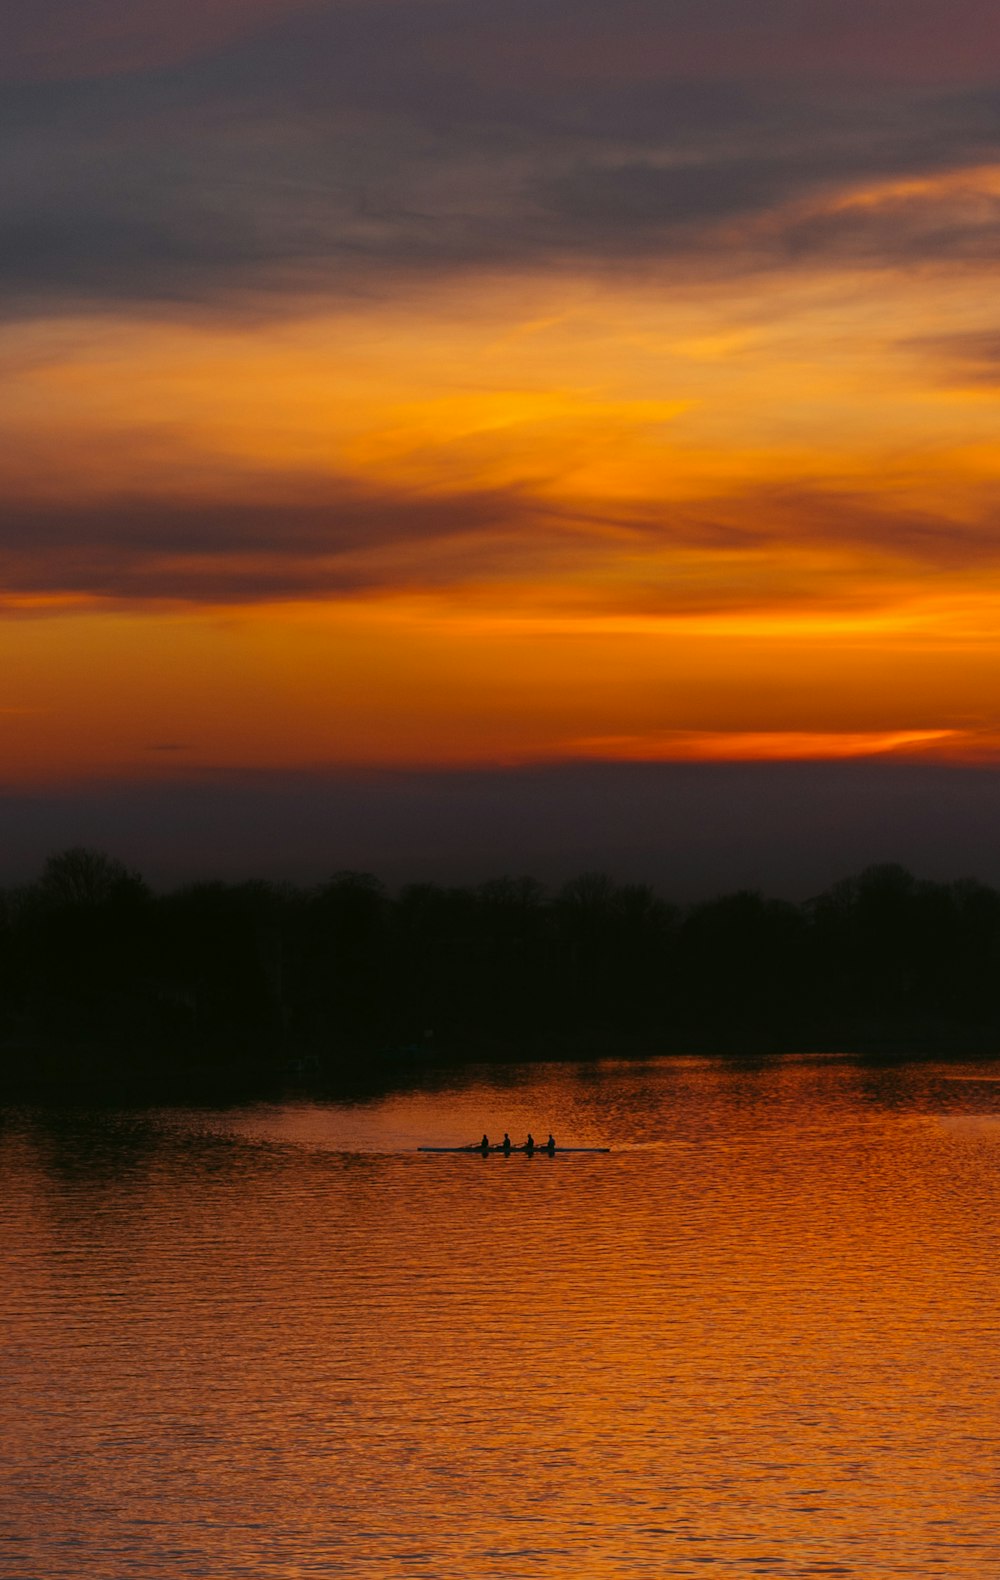 a group of people rowing a boat on a lake at sunset